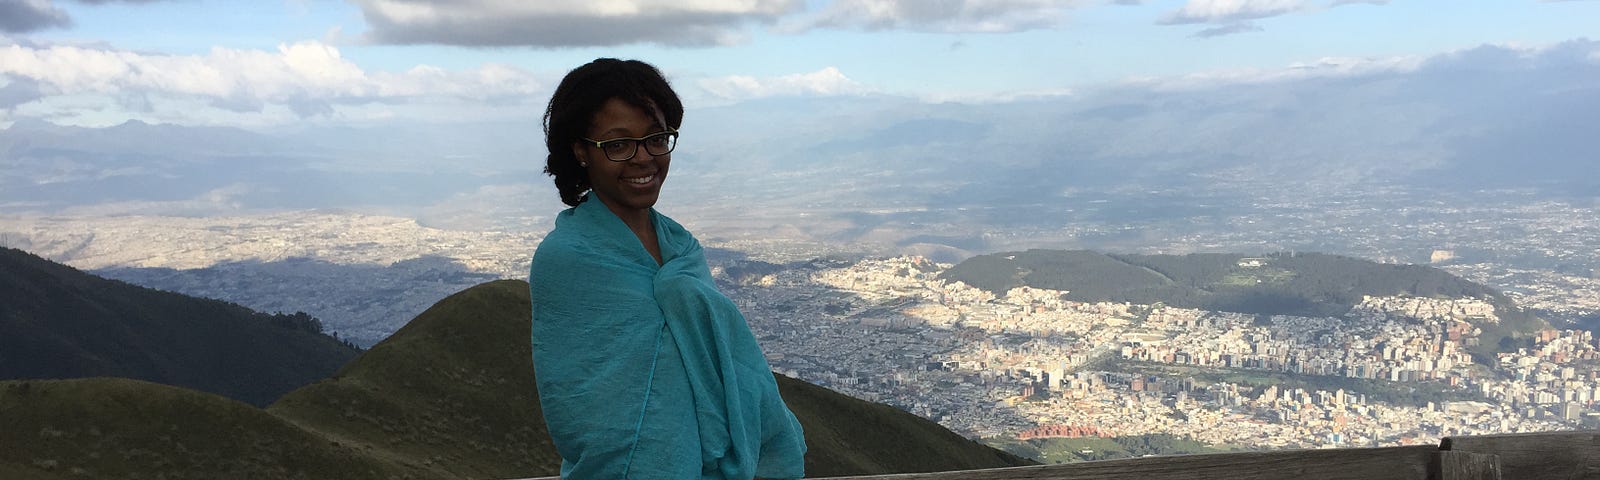 Aneisha standing in front of a mountain in Ecuador wearing a blue shawl.